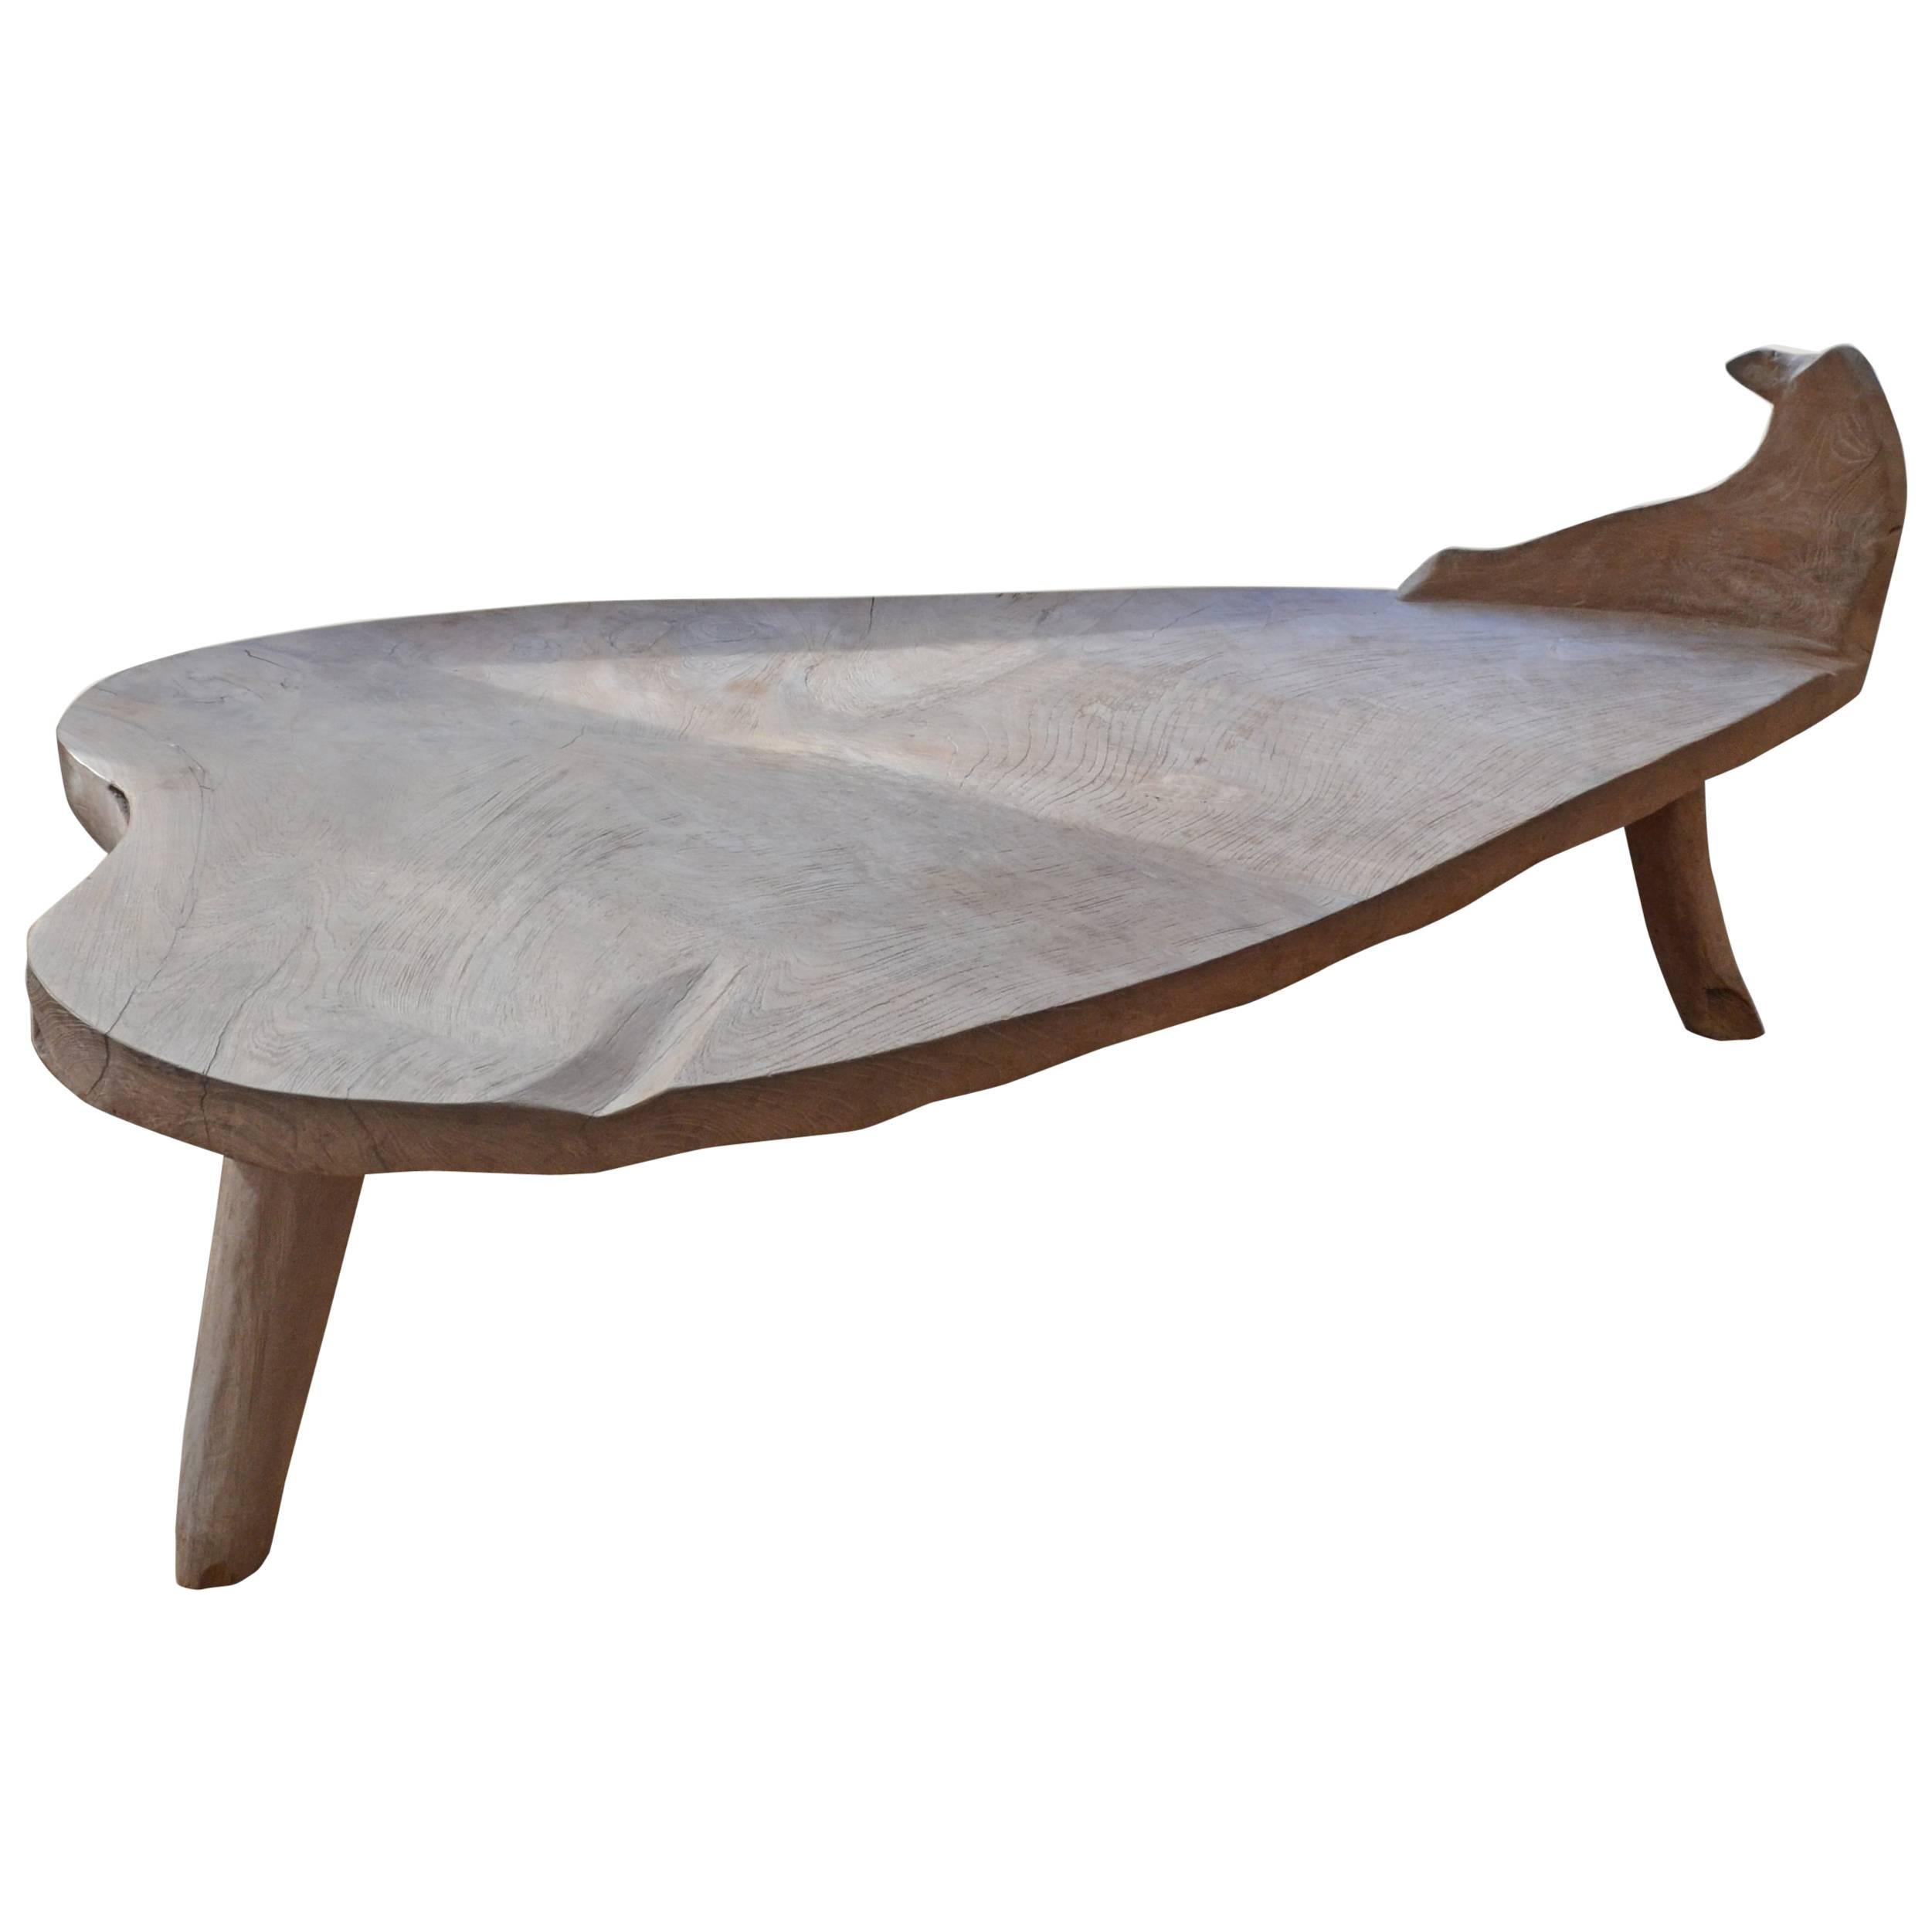 Andrianna Shamaris Hand-Carved Teak Wood Bench or Coffee Table